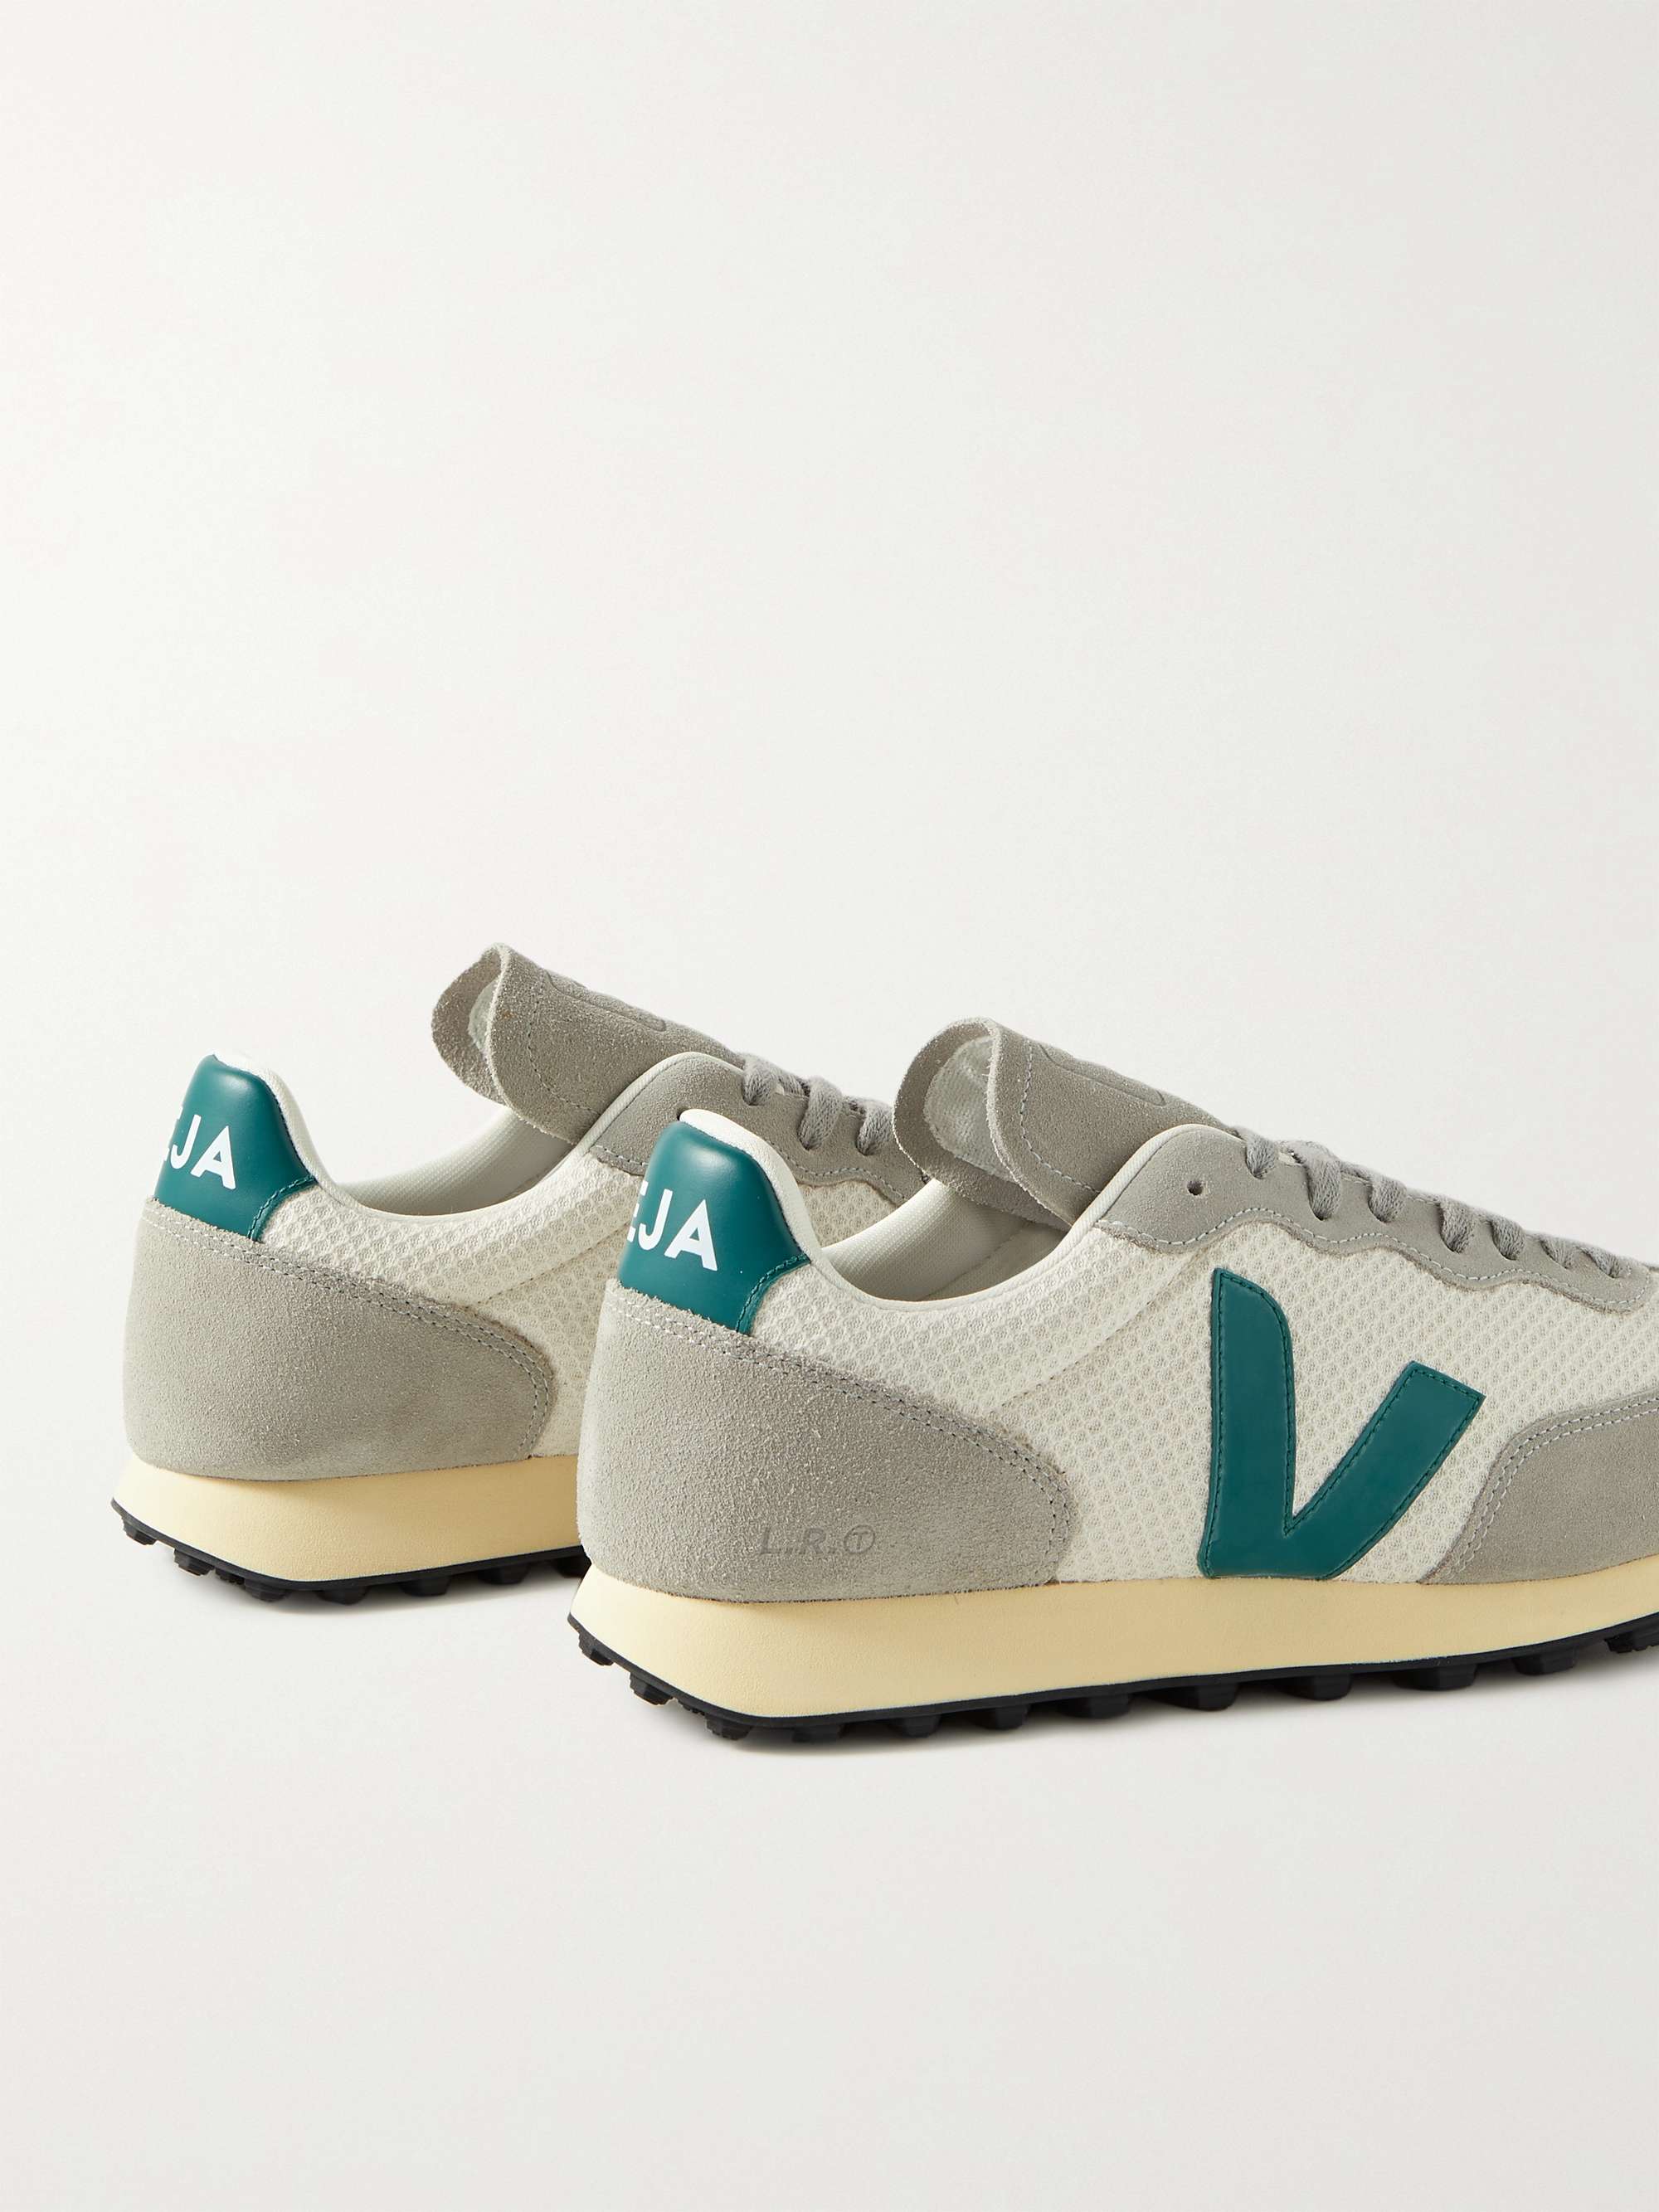 VEJA Rio Branco Leather and Rubber-Trimmed Hexamesh and Suede Sneakers